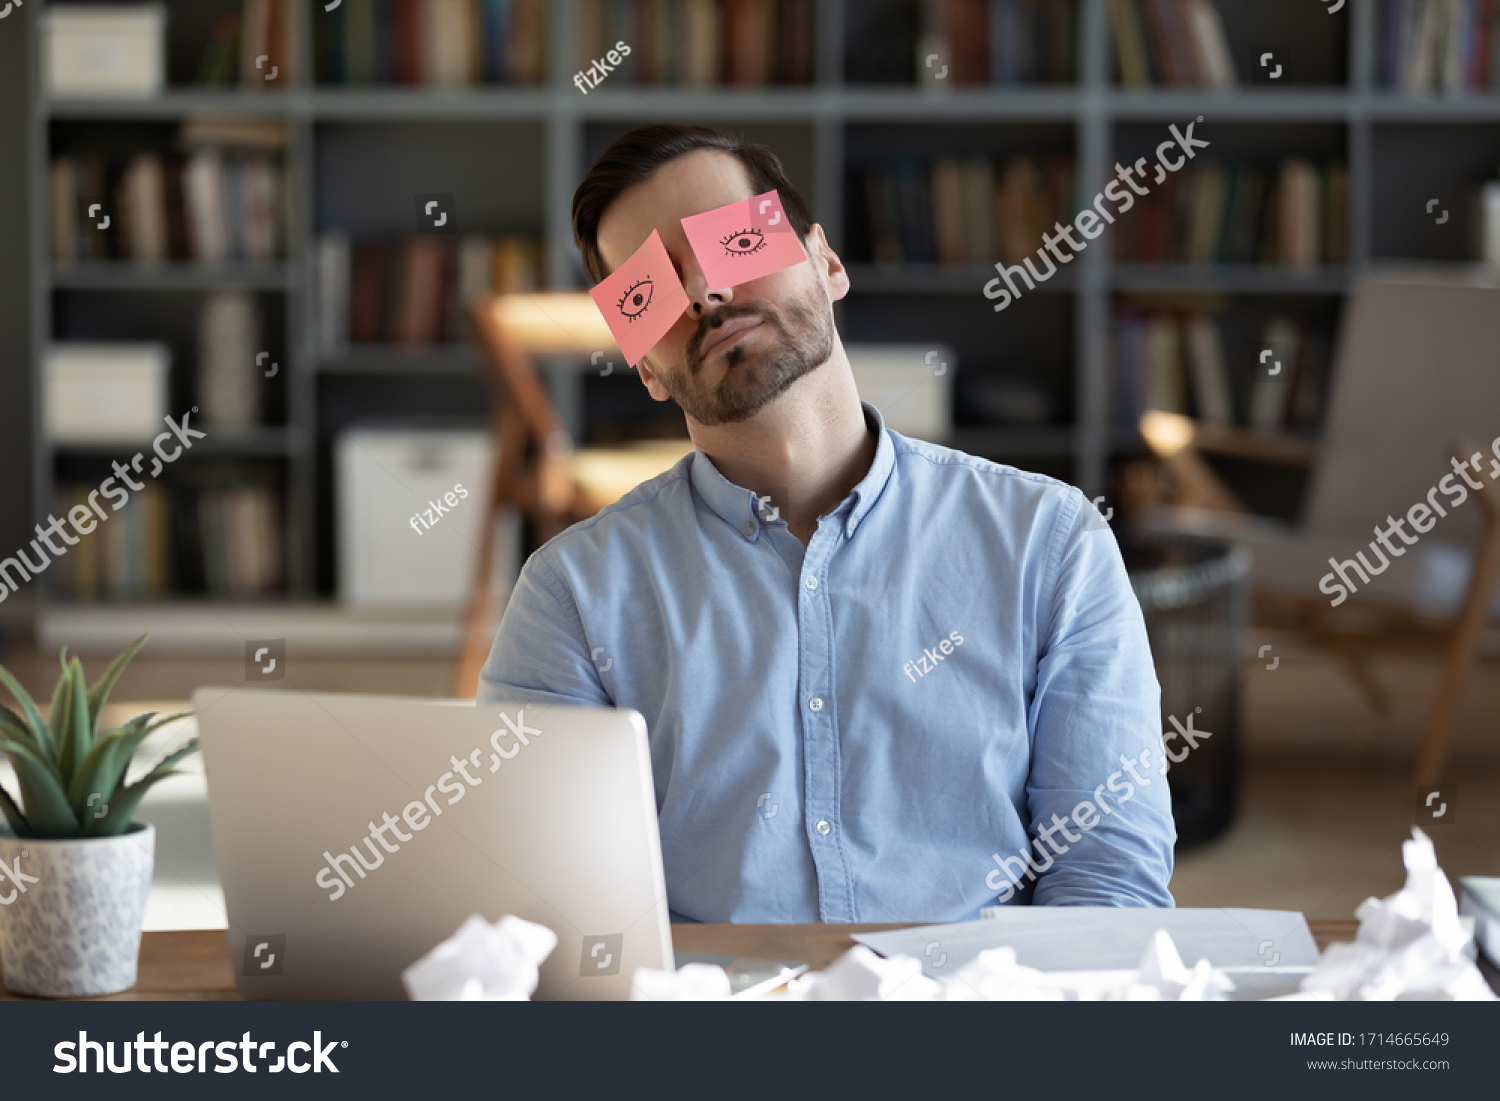 Exhausted tired businessman with painted eyes on stickers, adhesive notes on face sleeping at workplace, sitting at desk with laptop, unproductive lazy young male dozing, working on difficult project #1714665649